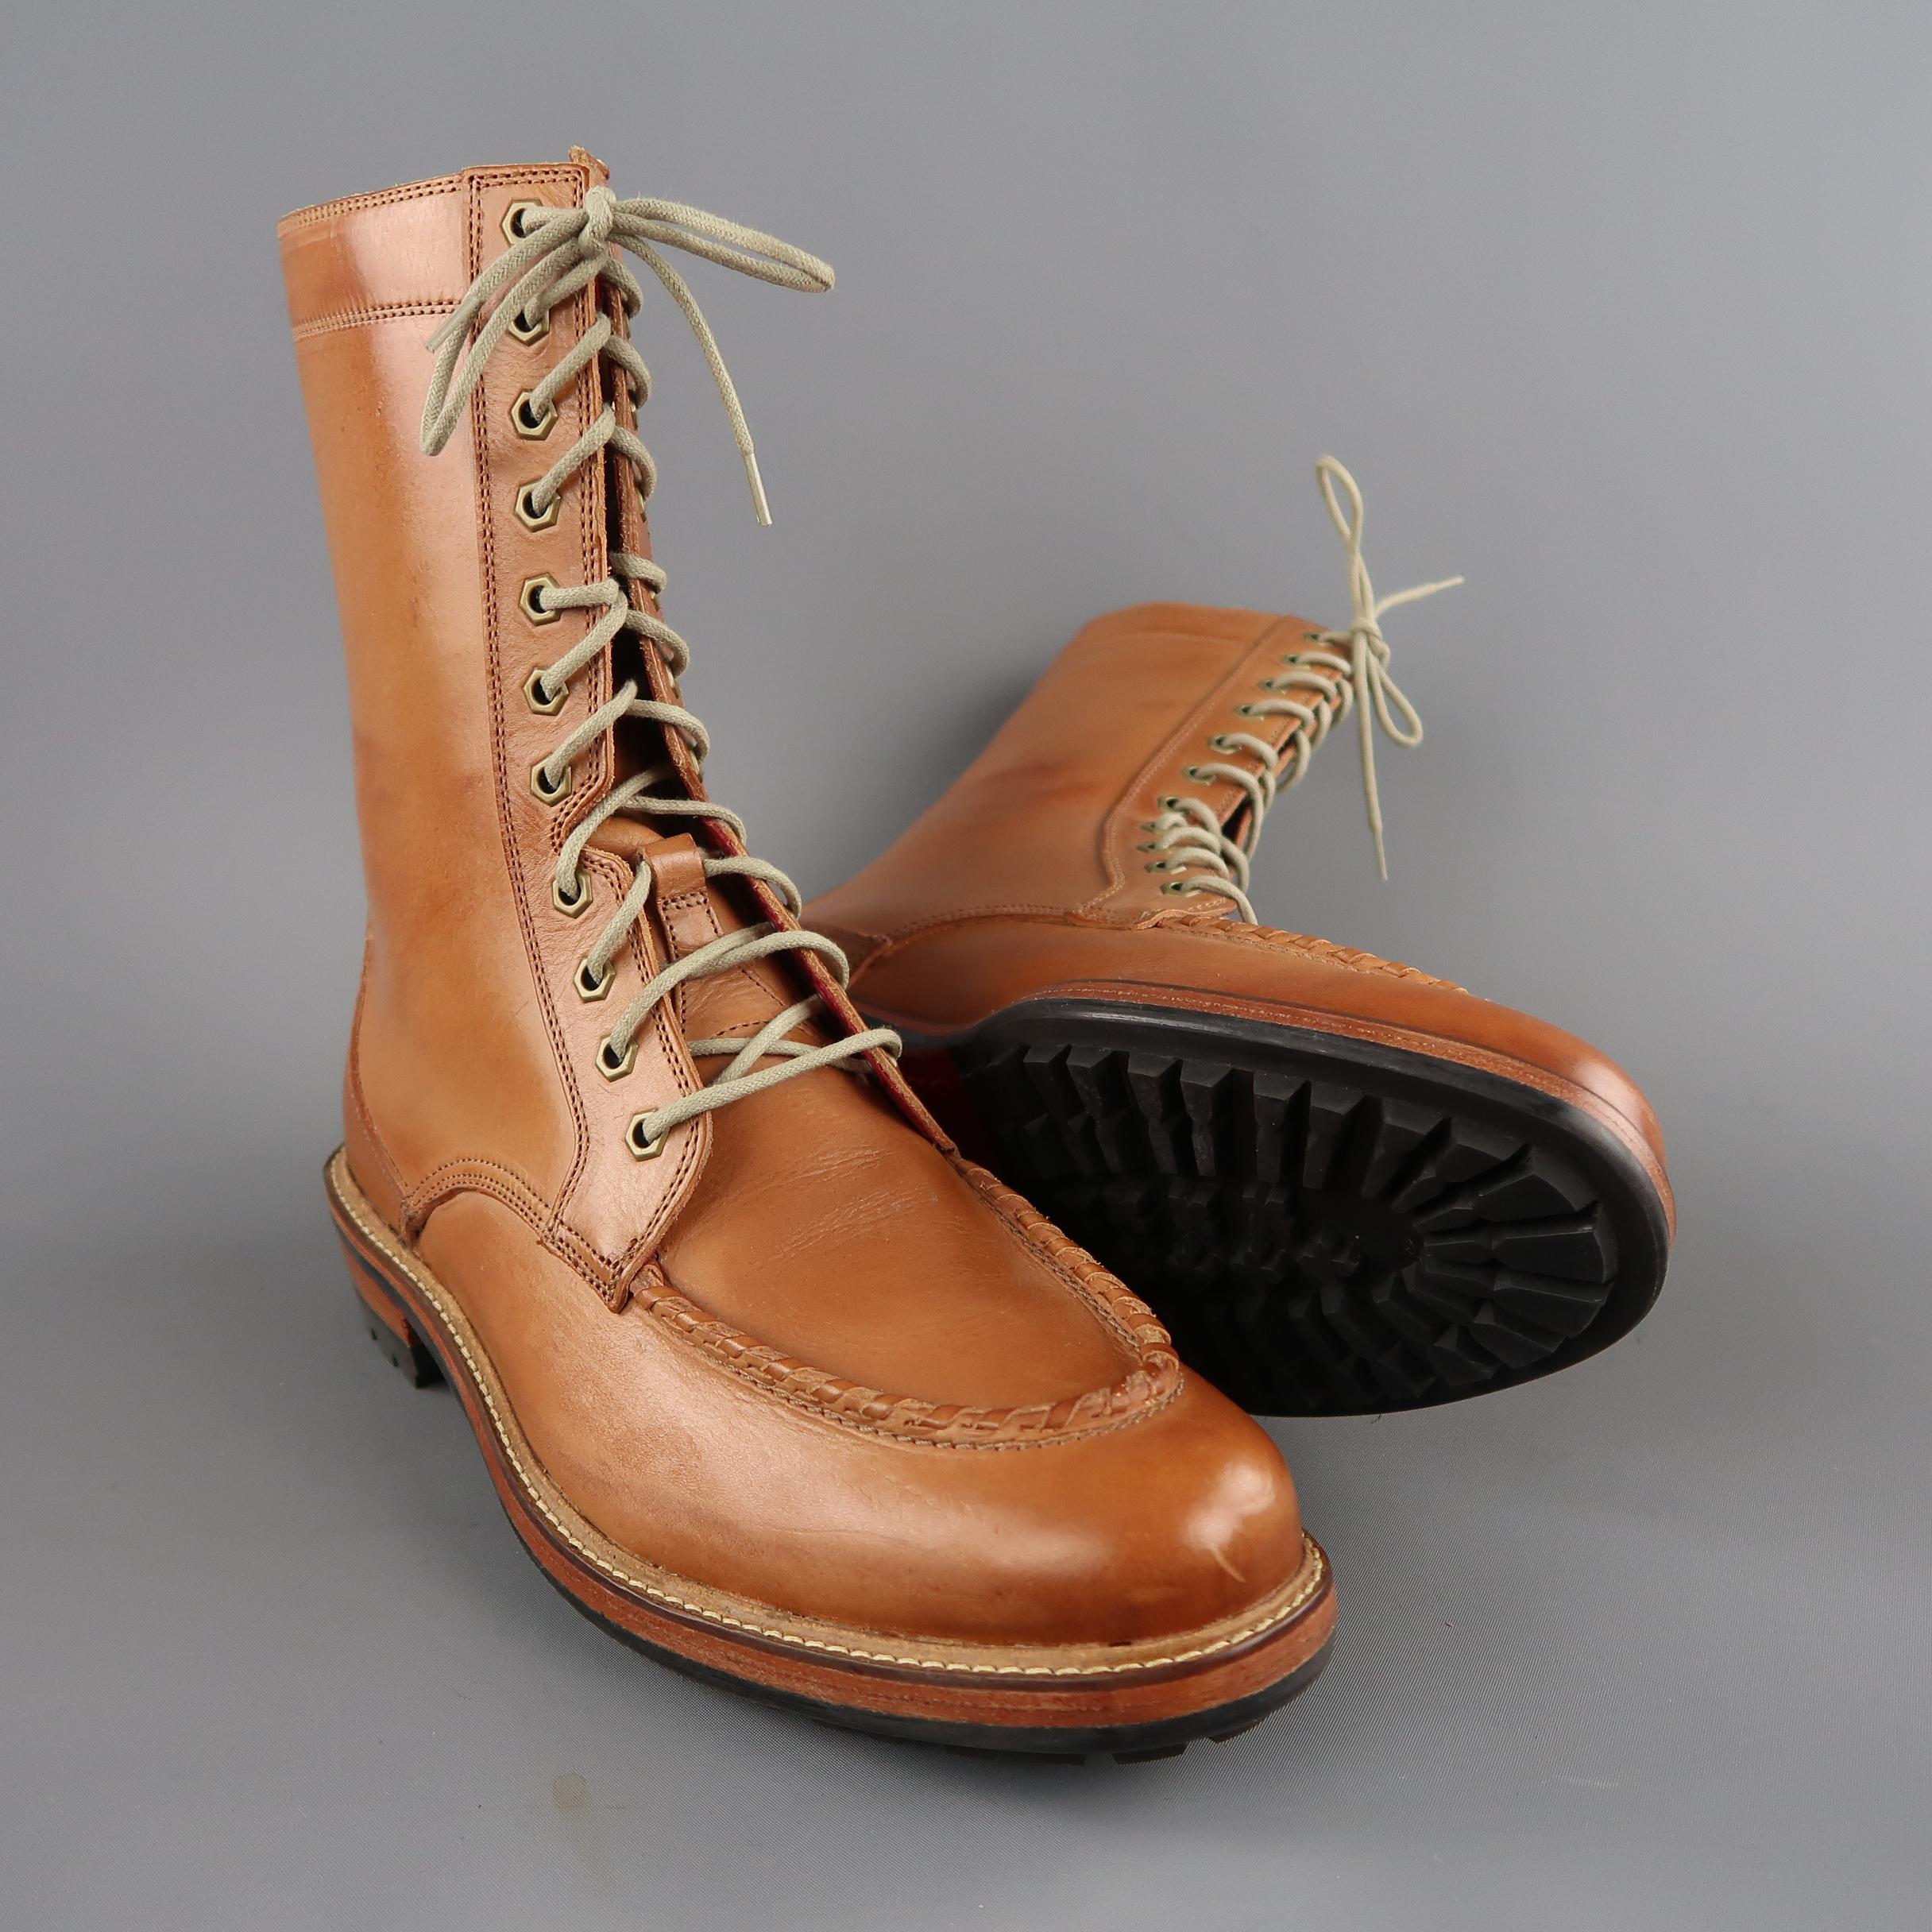 Tall over ankle length mid calf boots come in tan leather with a whip stitched apron toe, lace up front with antique gold tone grommets, and stacked, heeled sole.
 
Brand New.
Marked:10.5 M
 
Measurements:
 
Length: 9.5 in.
Outsole: 12 x 4.5 in.